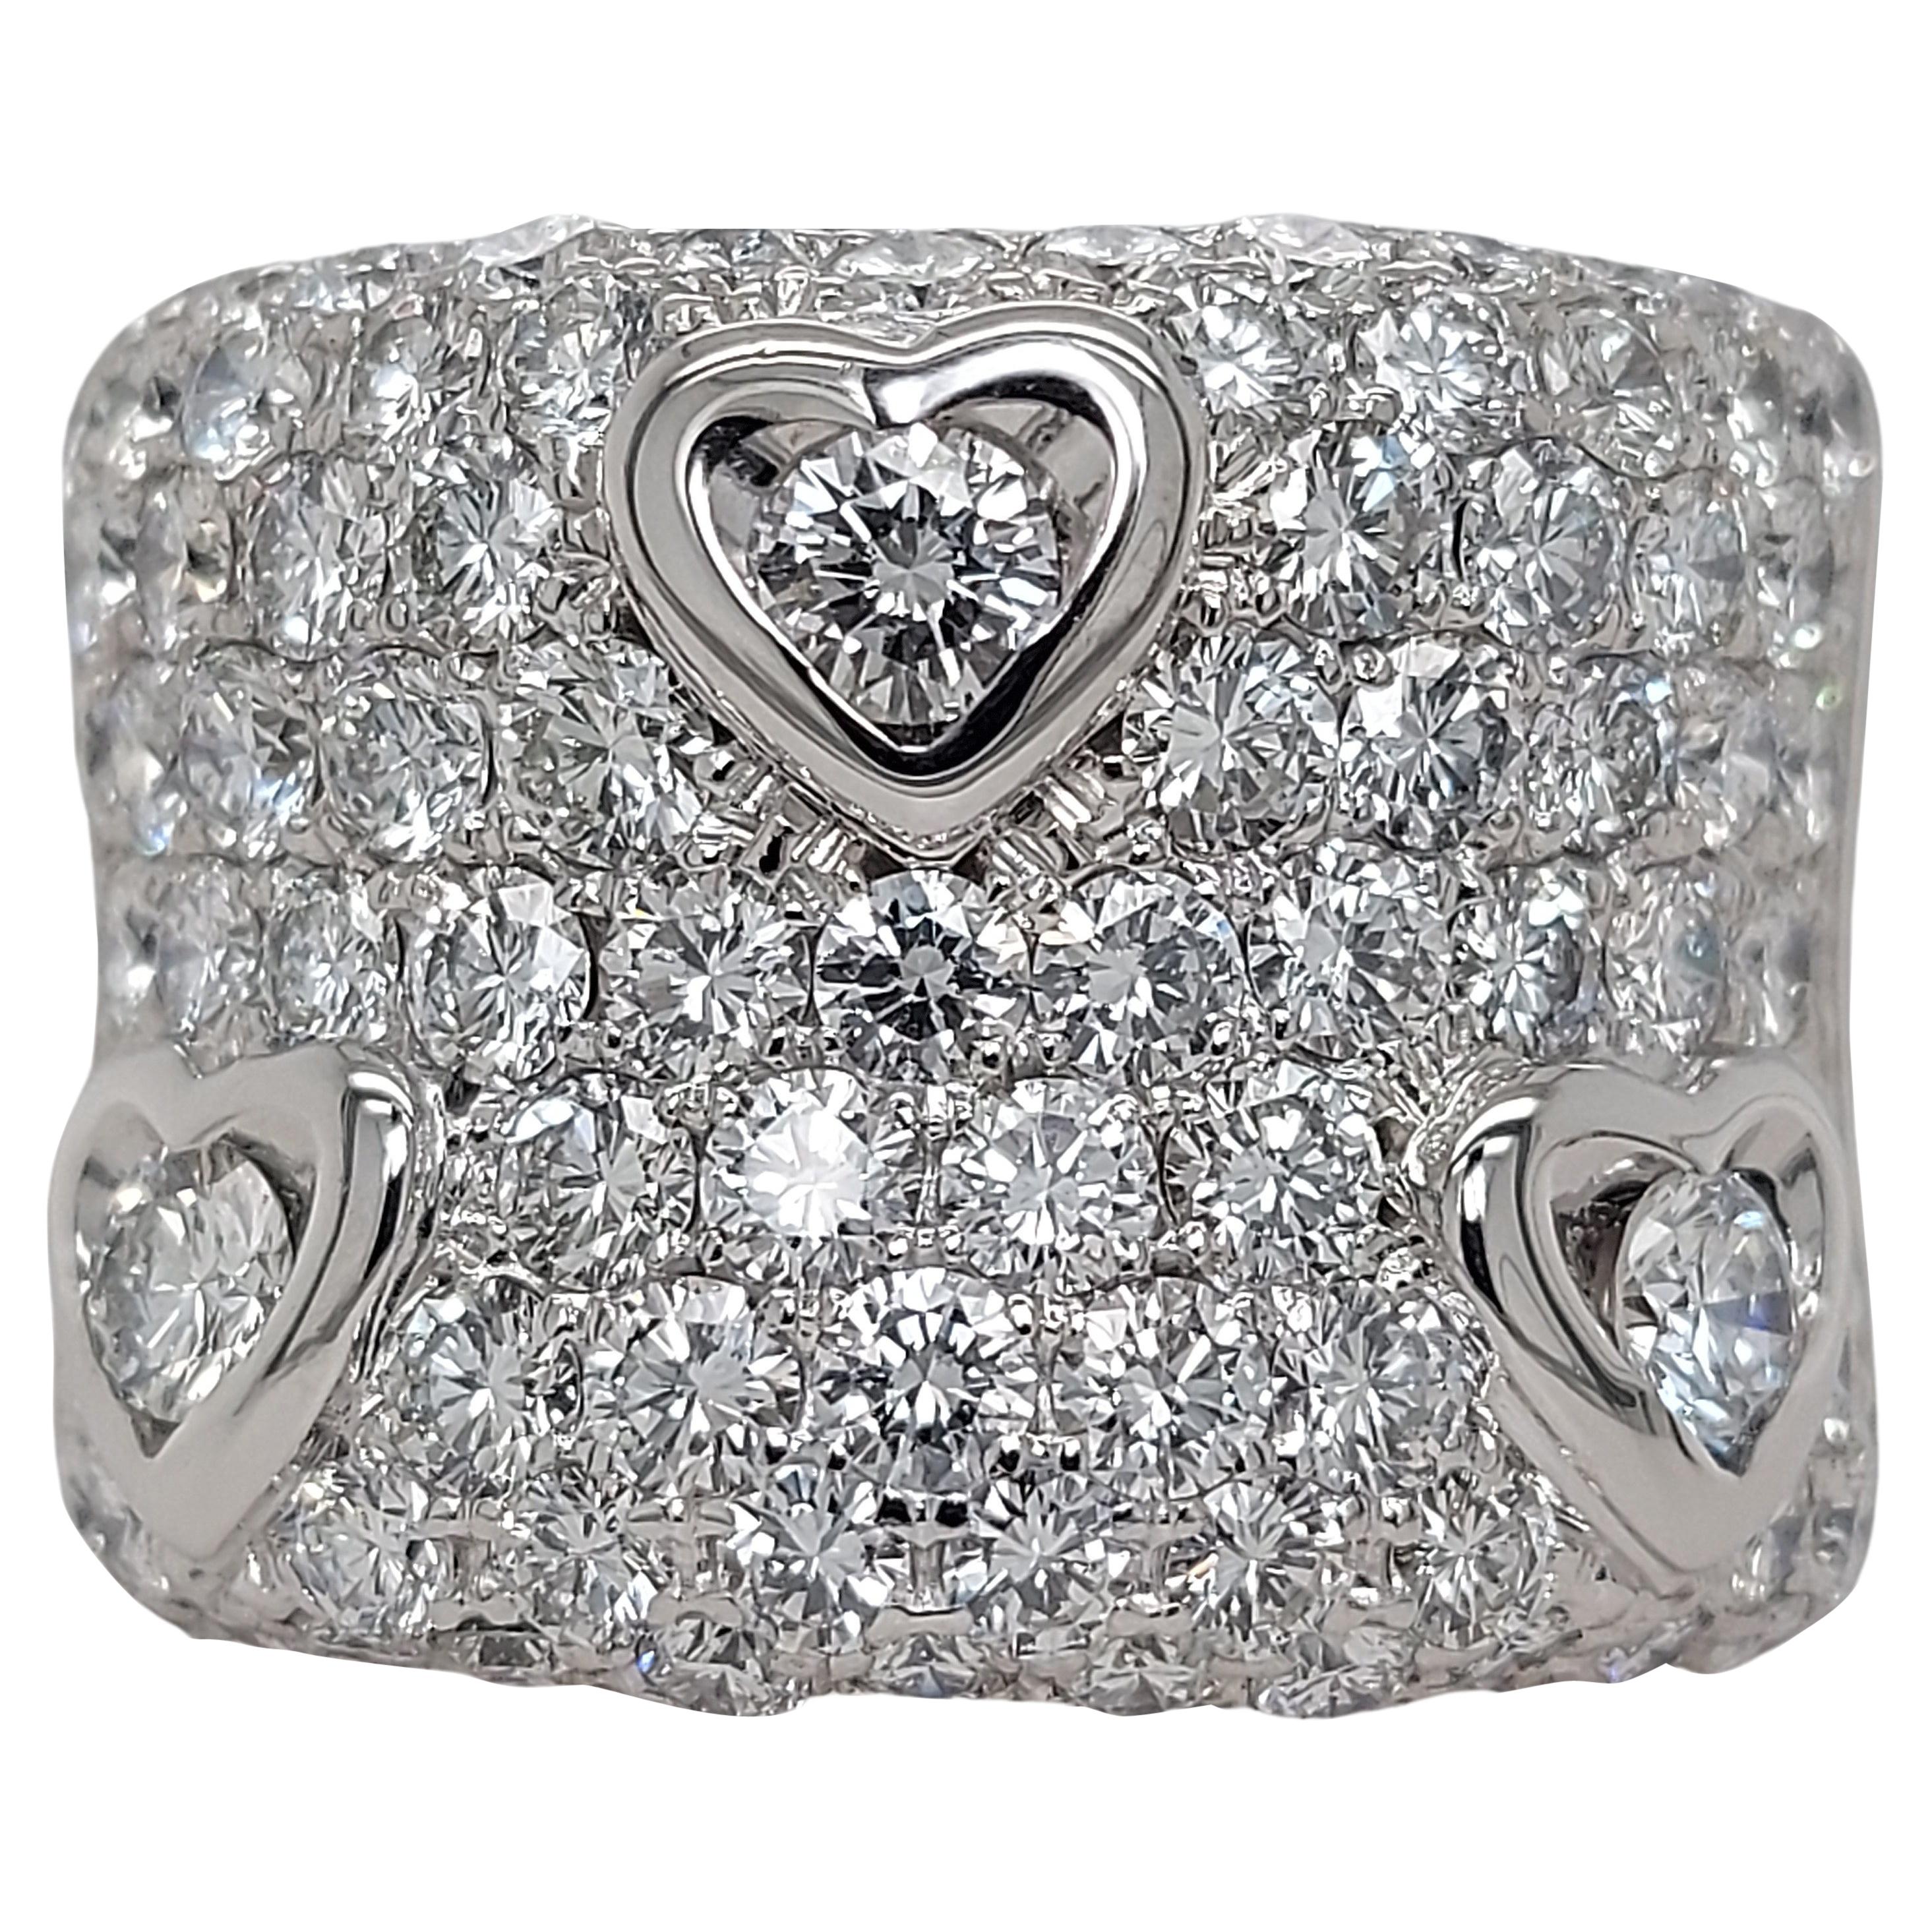 Stunning 18kt Gold Ring With 5.65ct Brilliant Cut Diamonds, 3 Set in Heart Shape